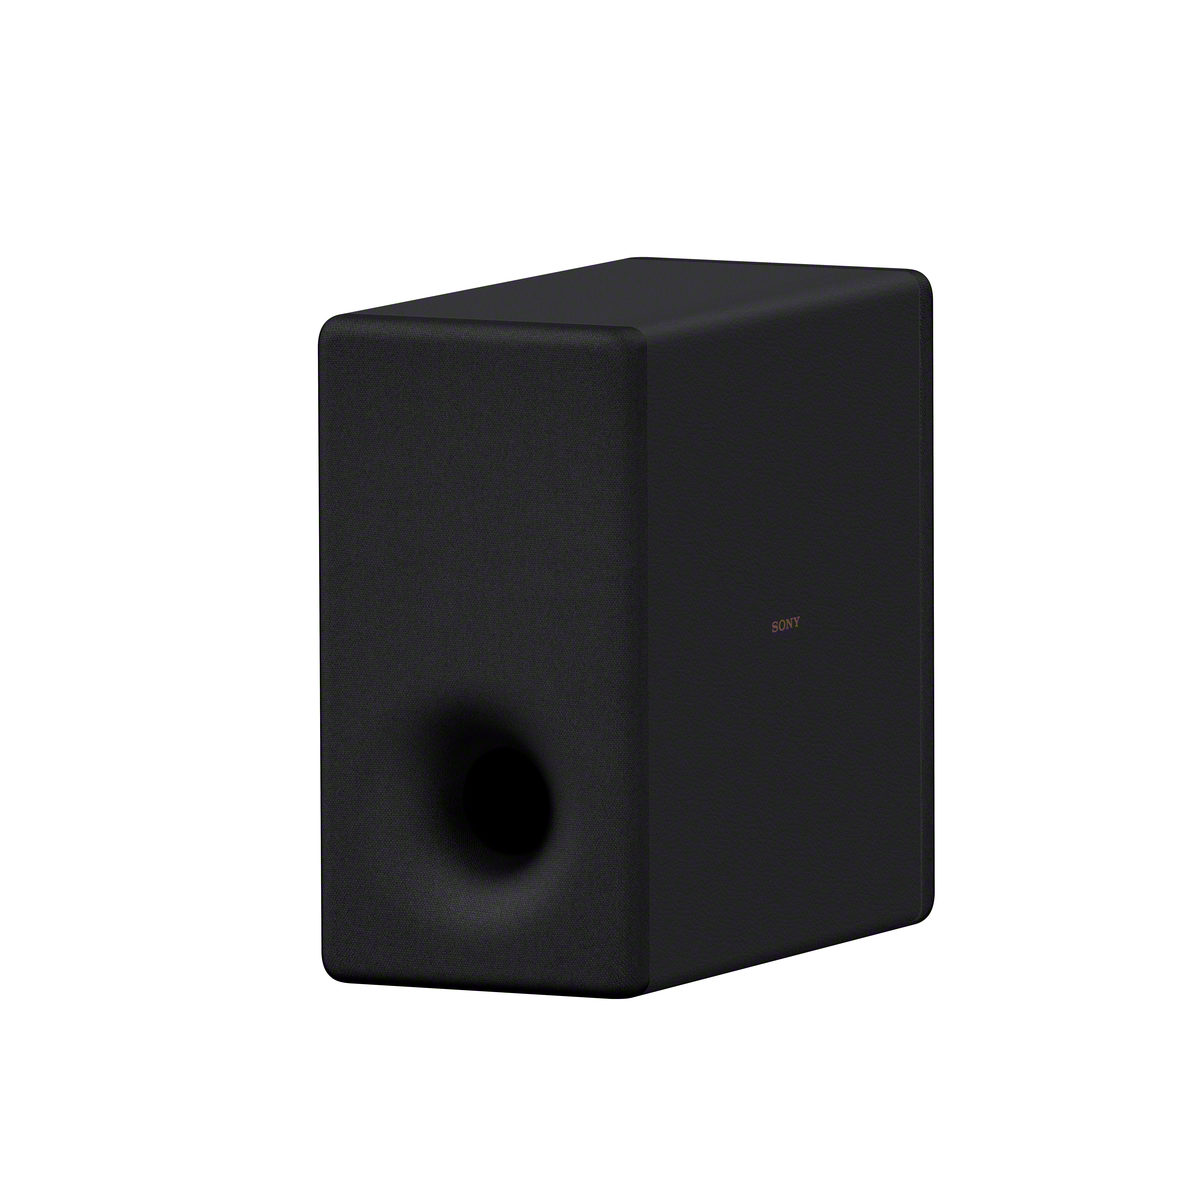 SASW3 Subwoofer Wireless 200W 6.3" Driver for HT-A7000/HT-A5000